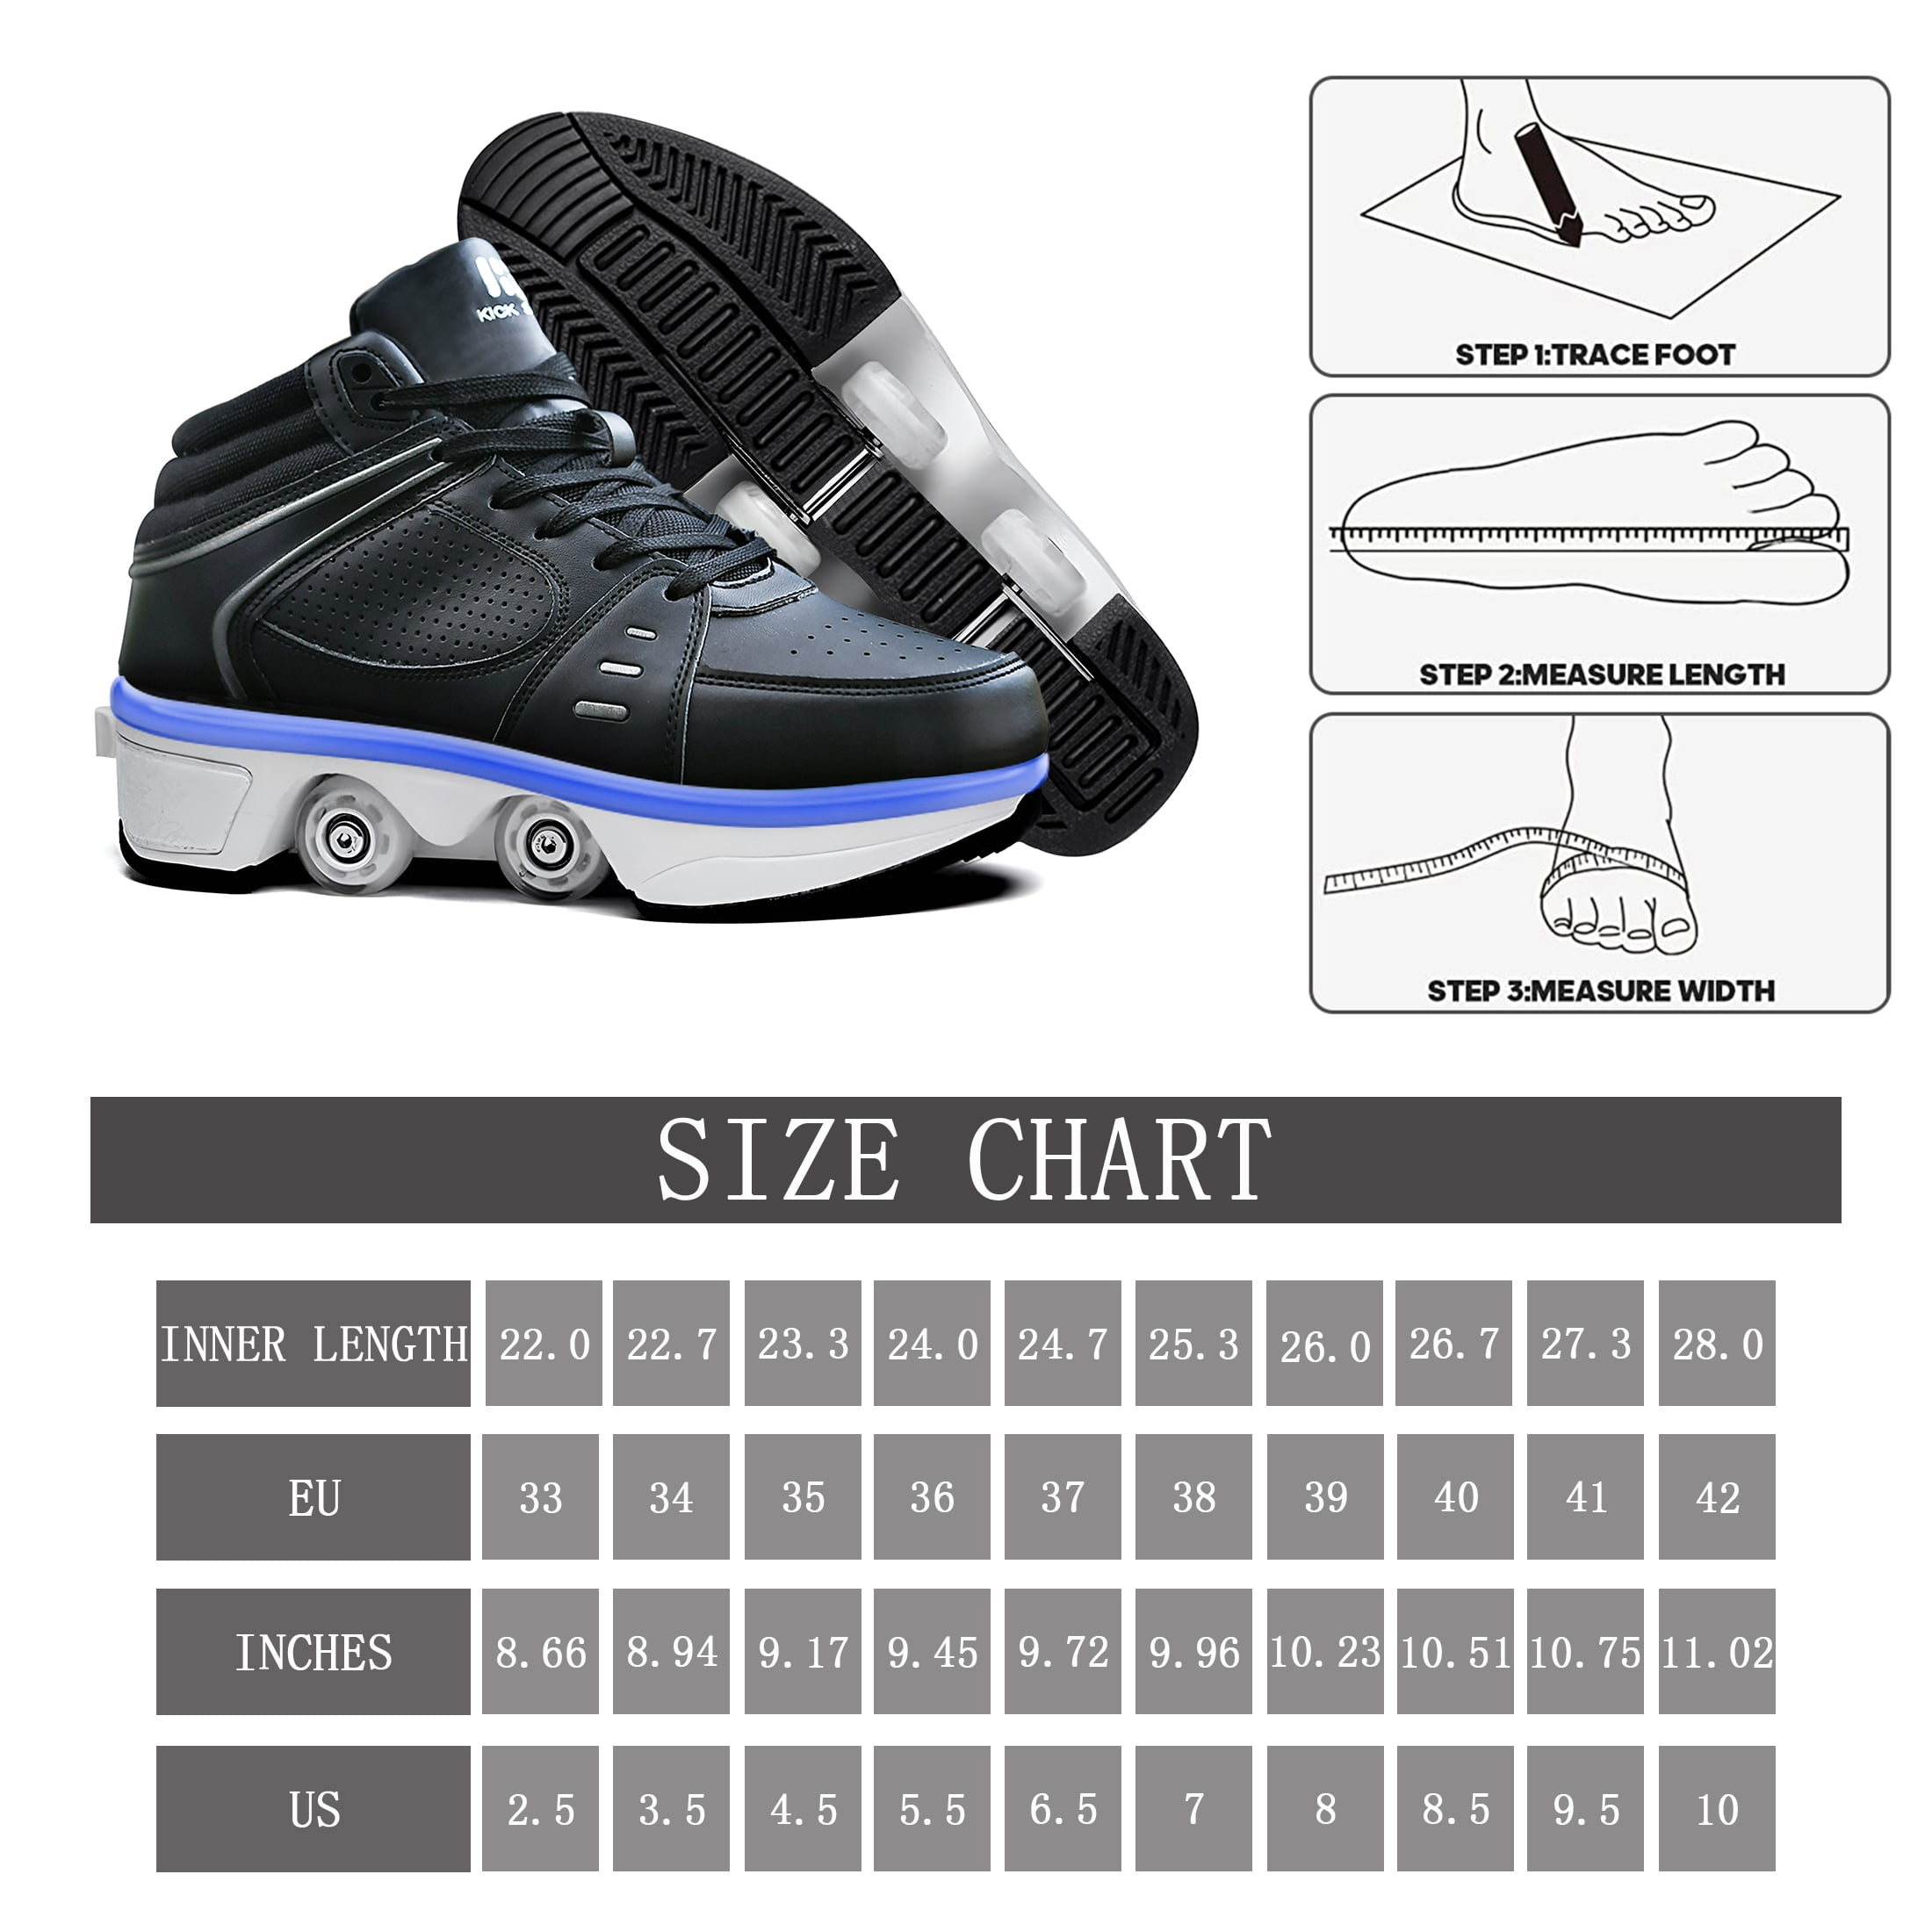 KOFUBOKE Roller Skate Shoes - Sneakers - Roller Shoes 2-in-1 Suitable for  Outdoor Sports Skating Invisible Roller Skates The Best Choice for Building